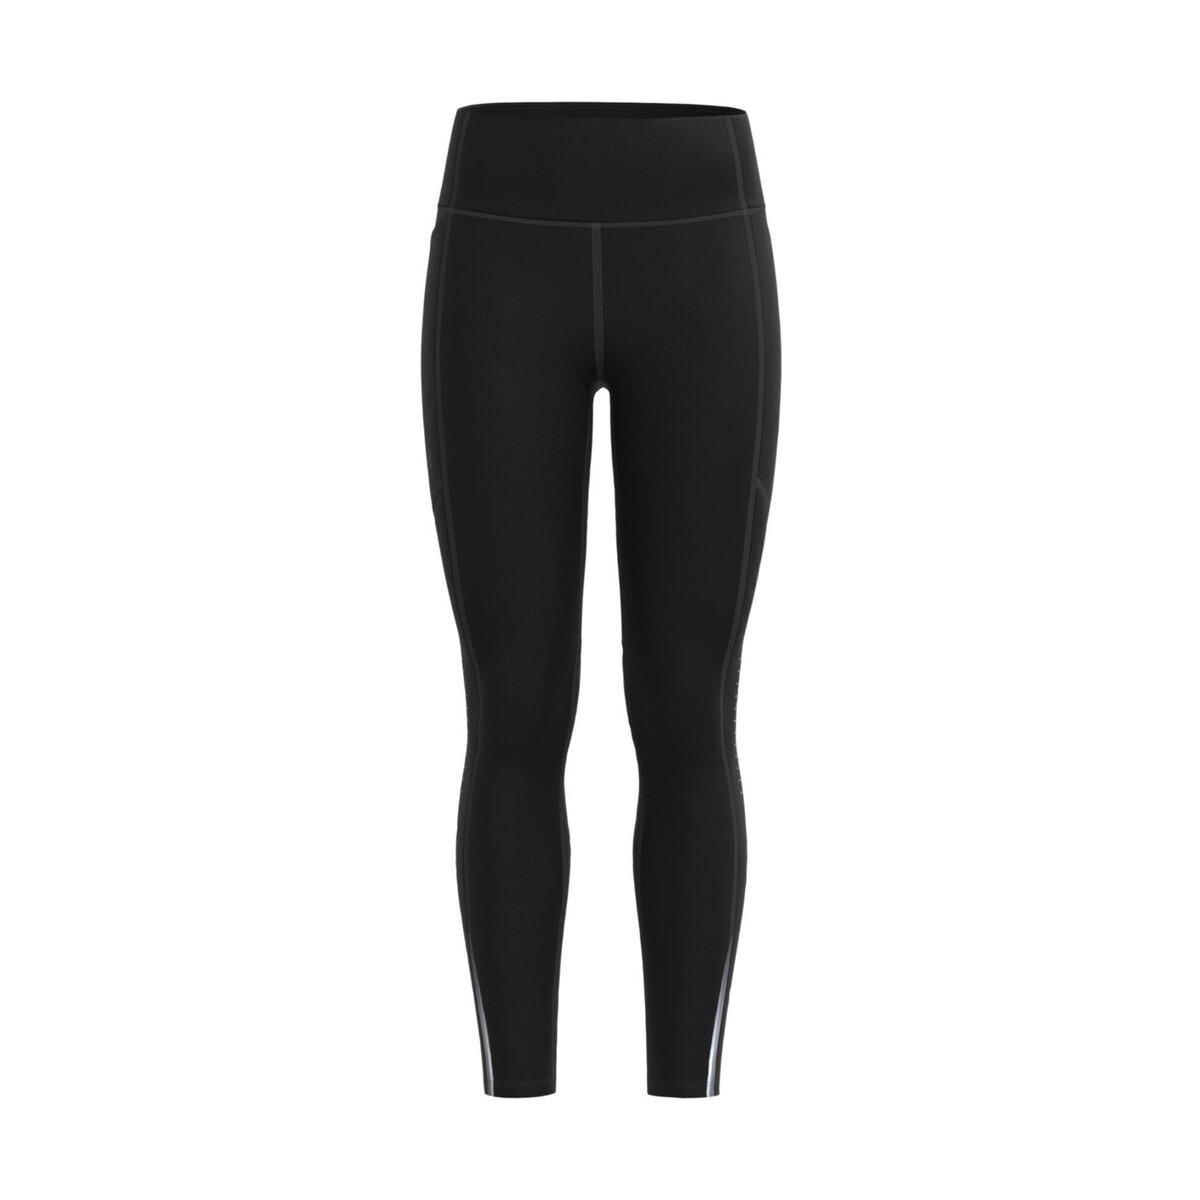 textil Mujer Pantalones de chándal Under Armour UA FLY FAST 3.0 TIGHT Negro